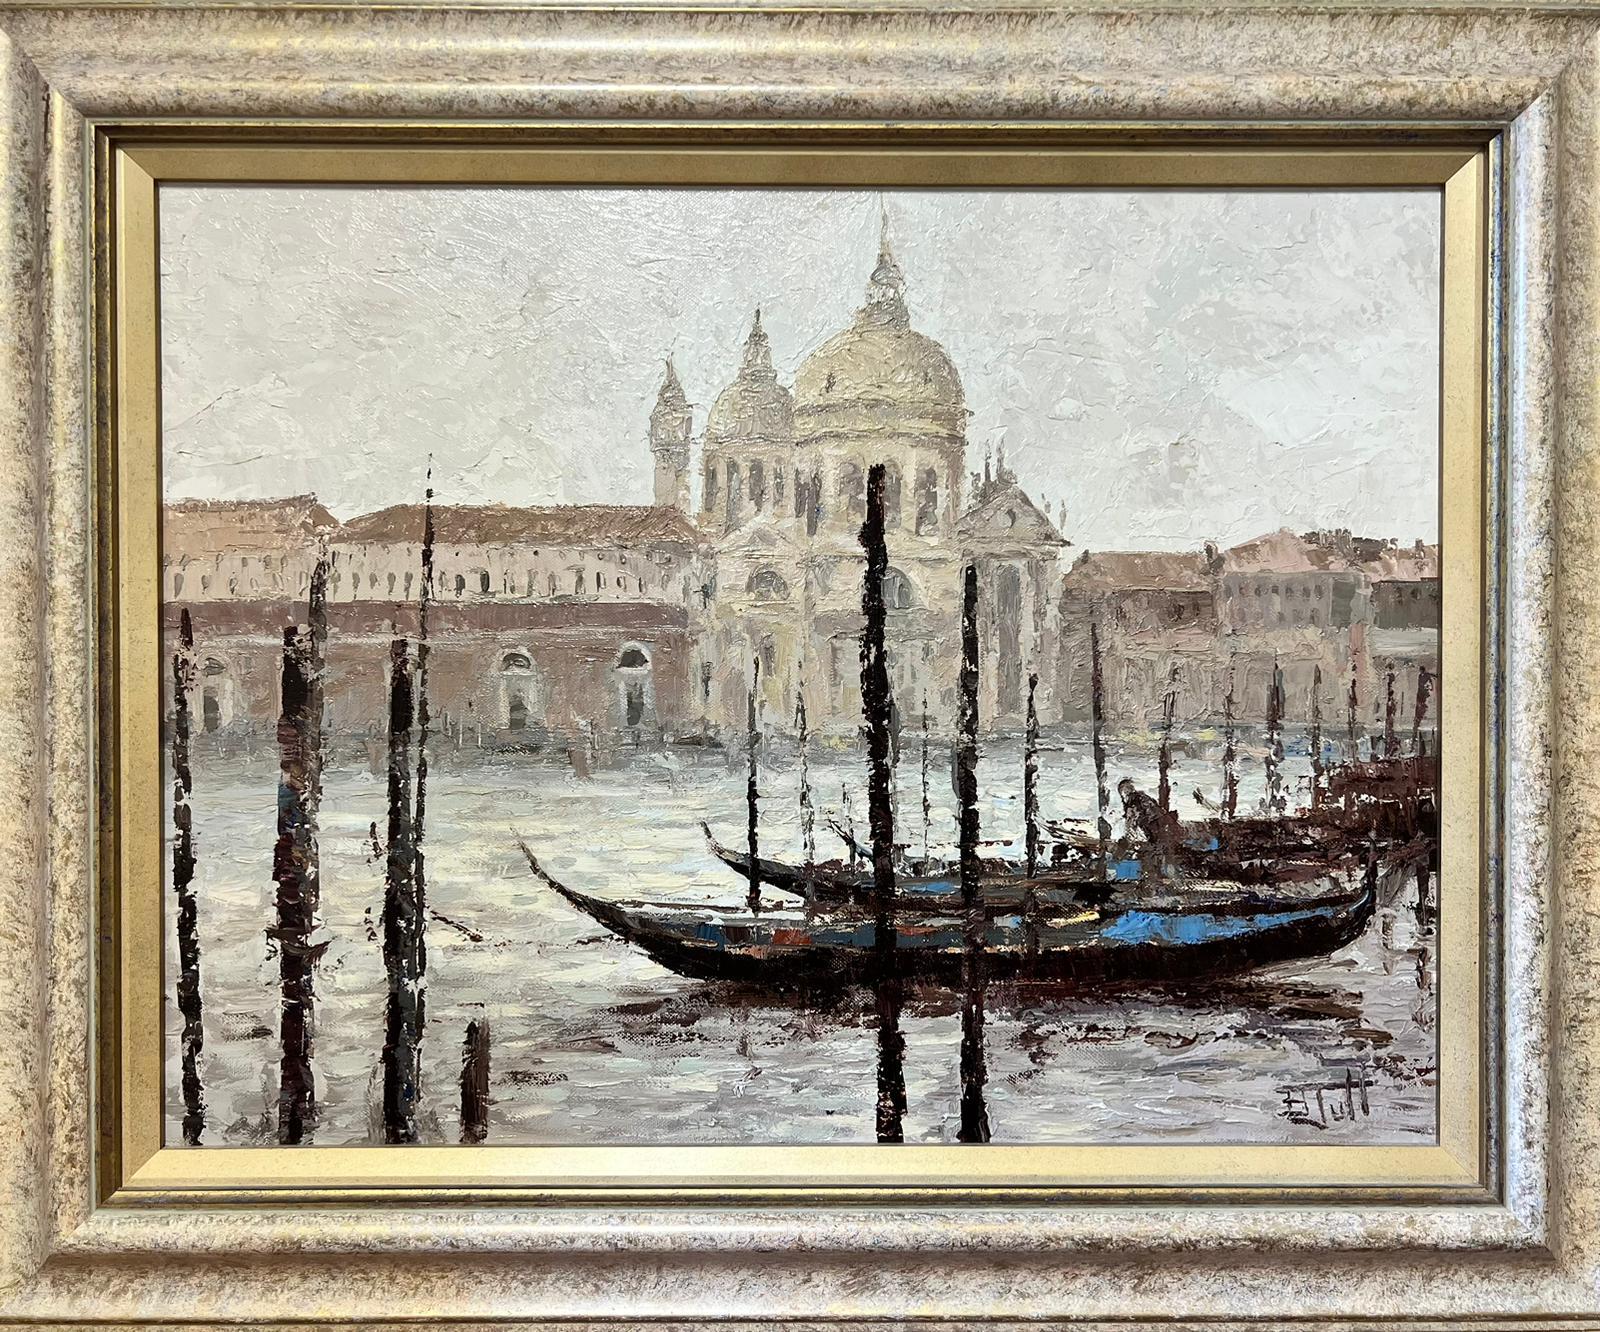 Venetian Scene With Gondolas
Brian Jull (British 1949)
signed oil painting on canvas, framed
framed: 24 x 30 inches
canvas: 18 x 24 inches
provenance: private collection, England 
condition: very good and sound condition 
